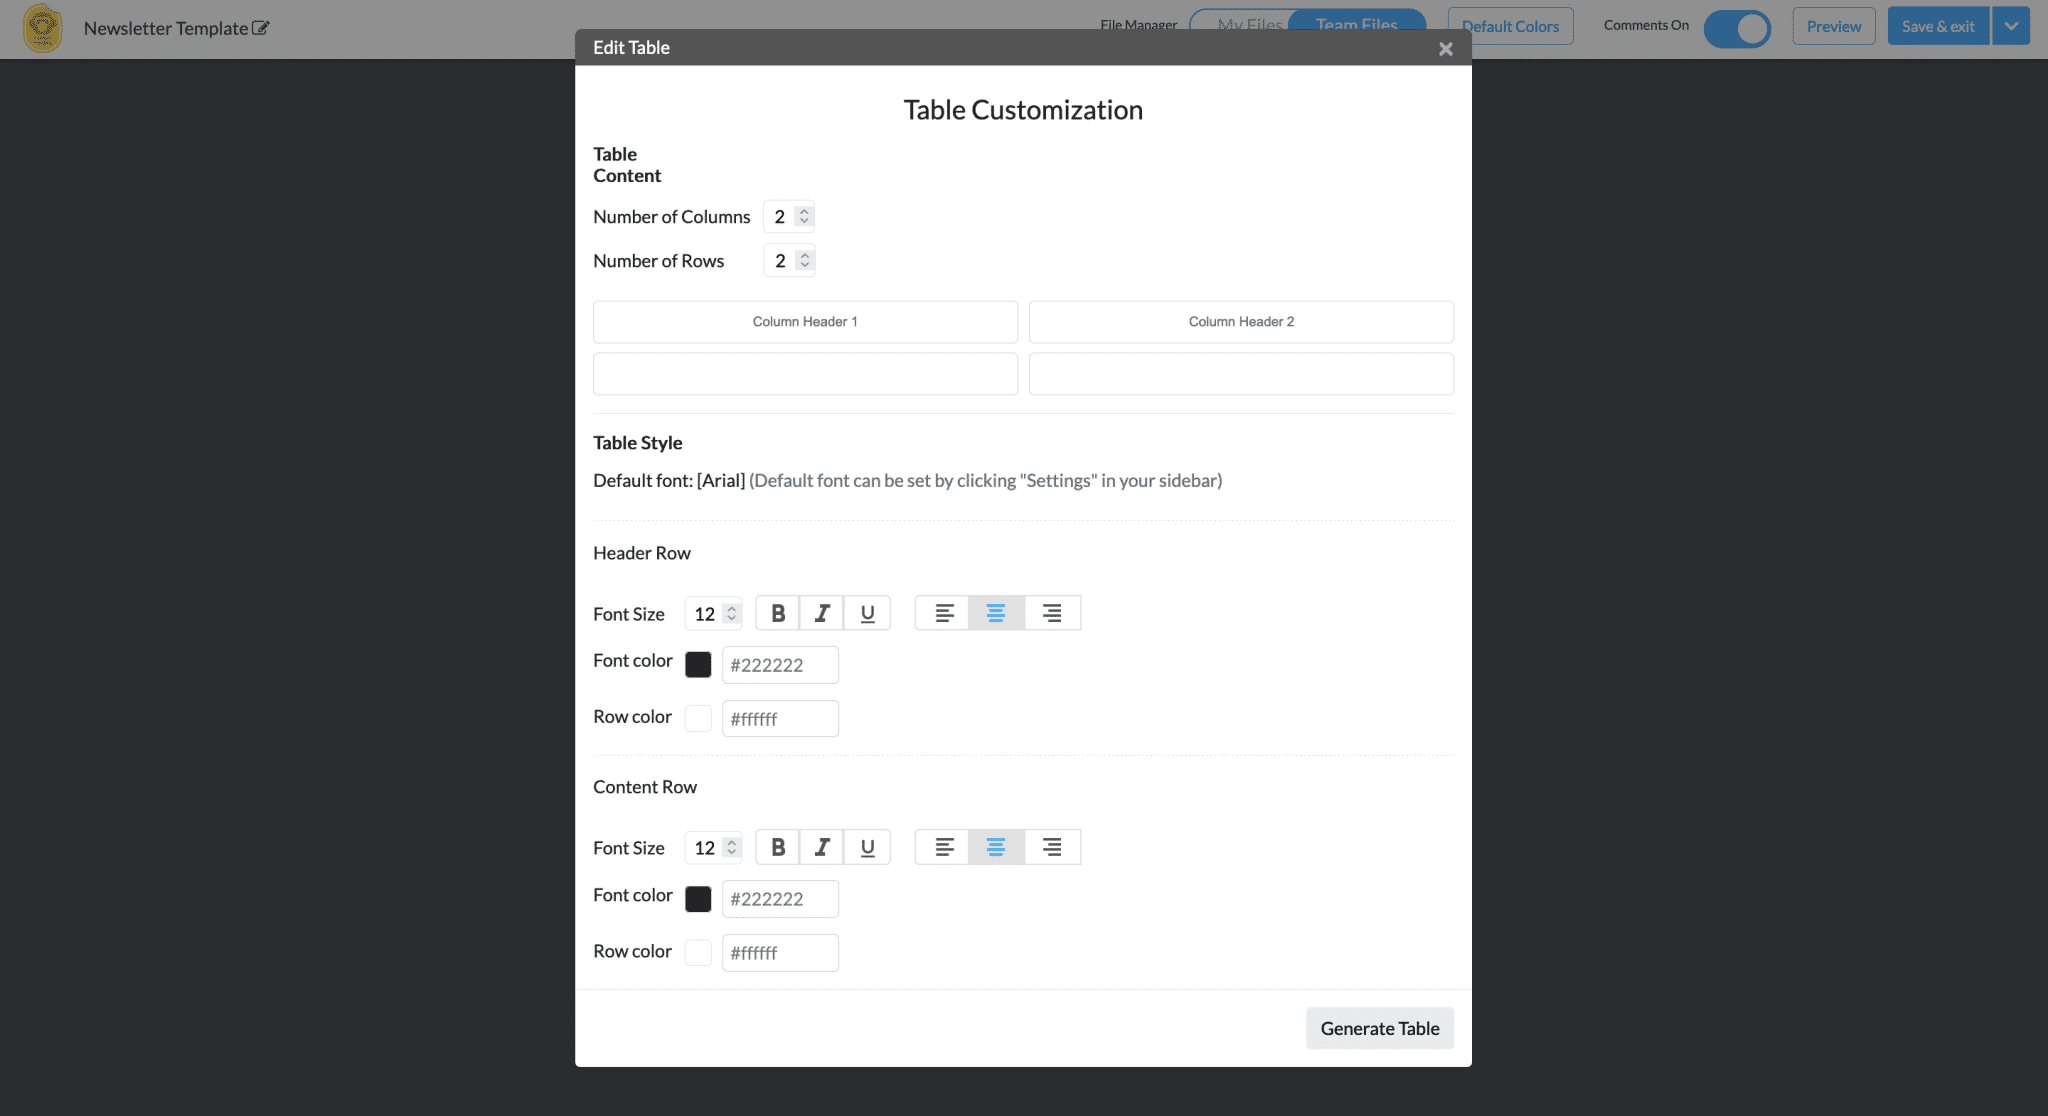 Screenshot of table customization settings within ContactMonkey's email template builder.